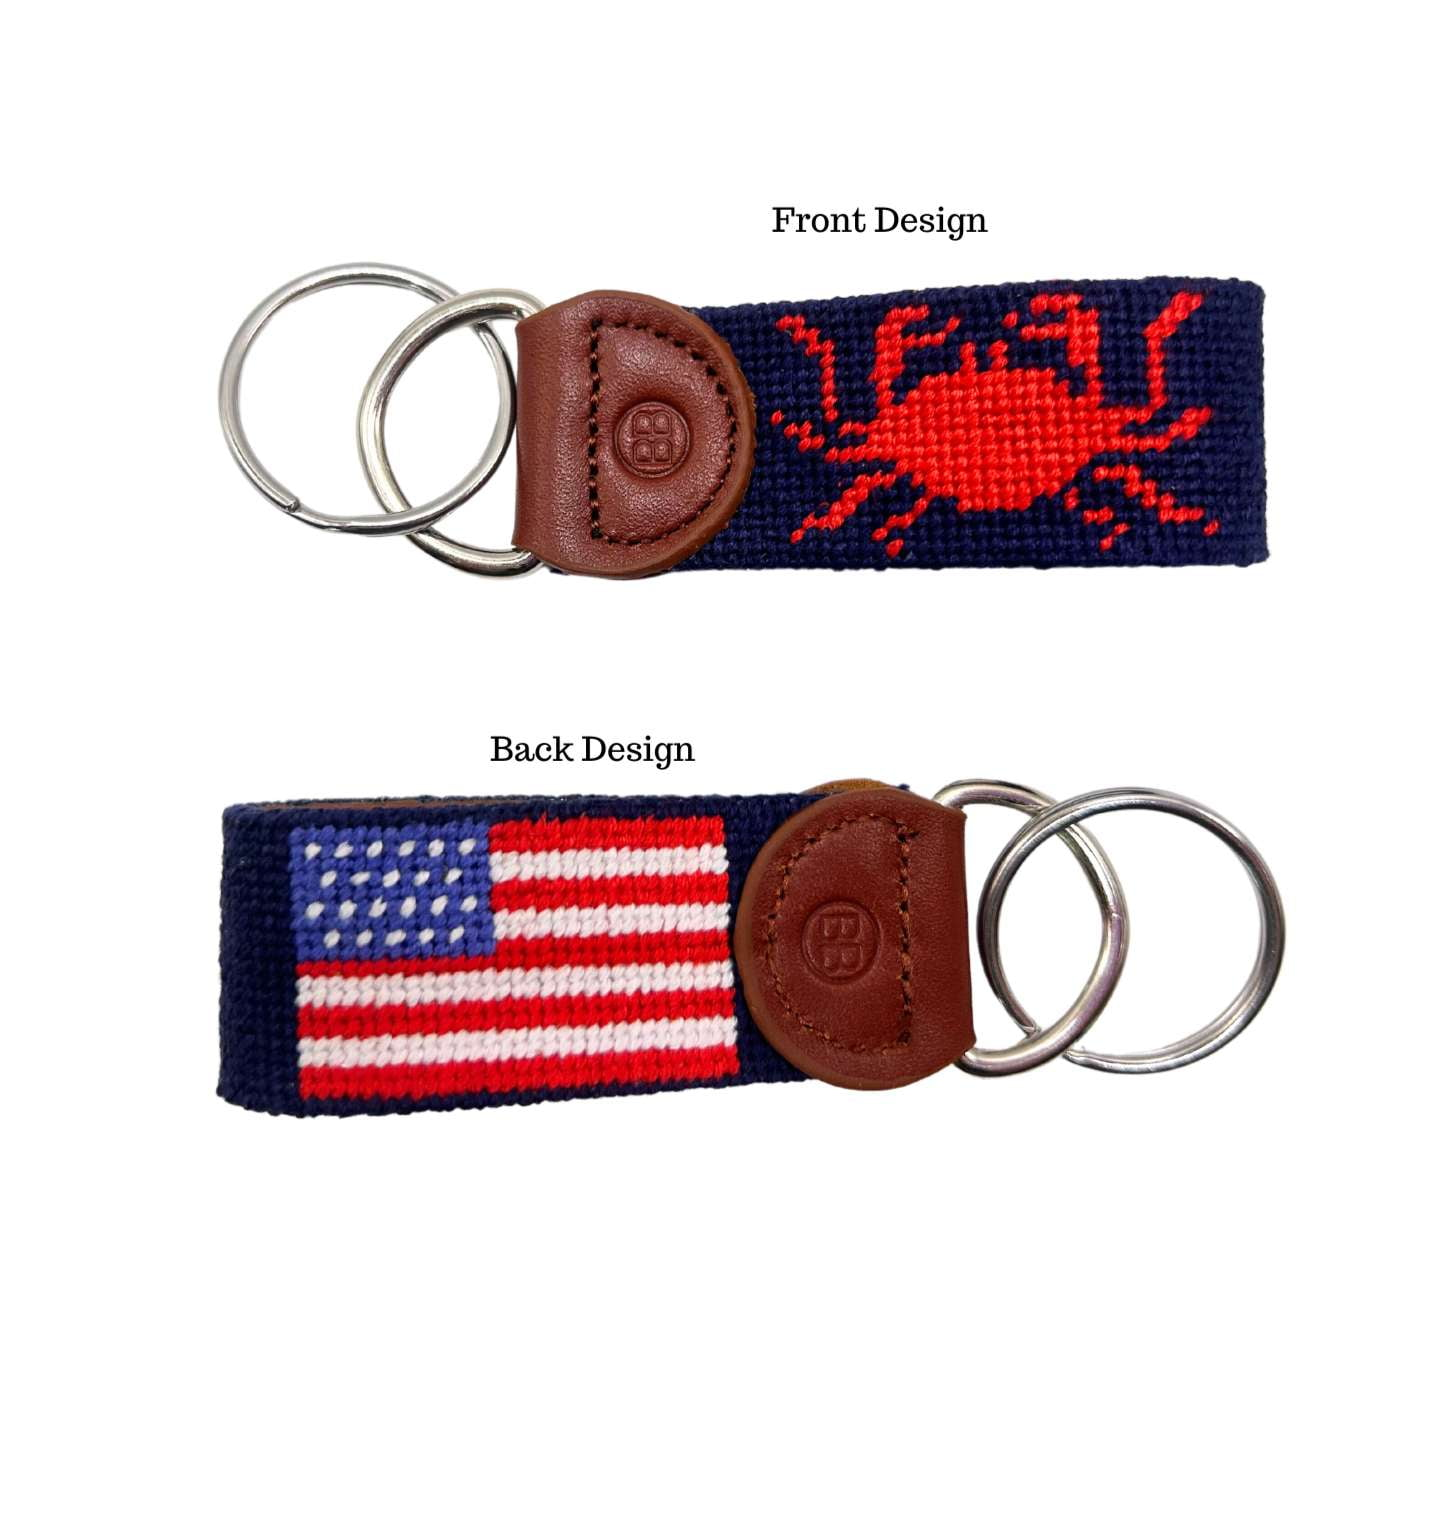 Needlepoint Key Fob - American flag and Crab designed